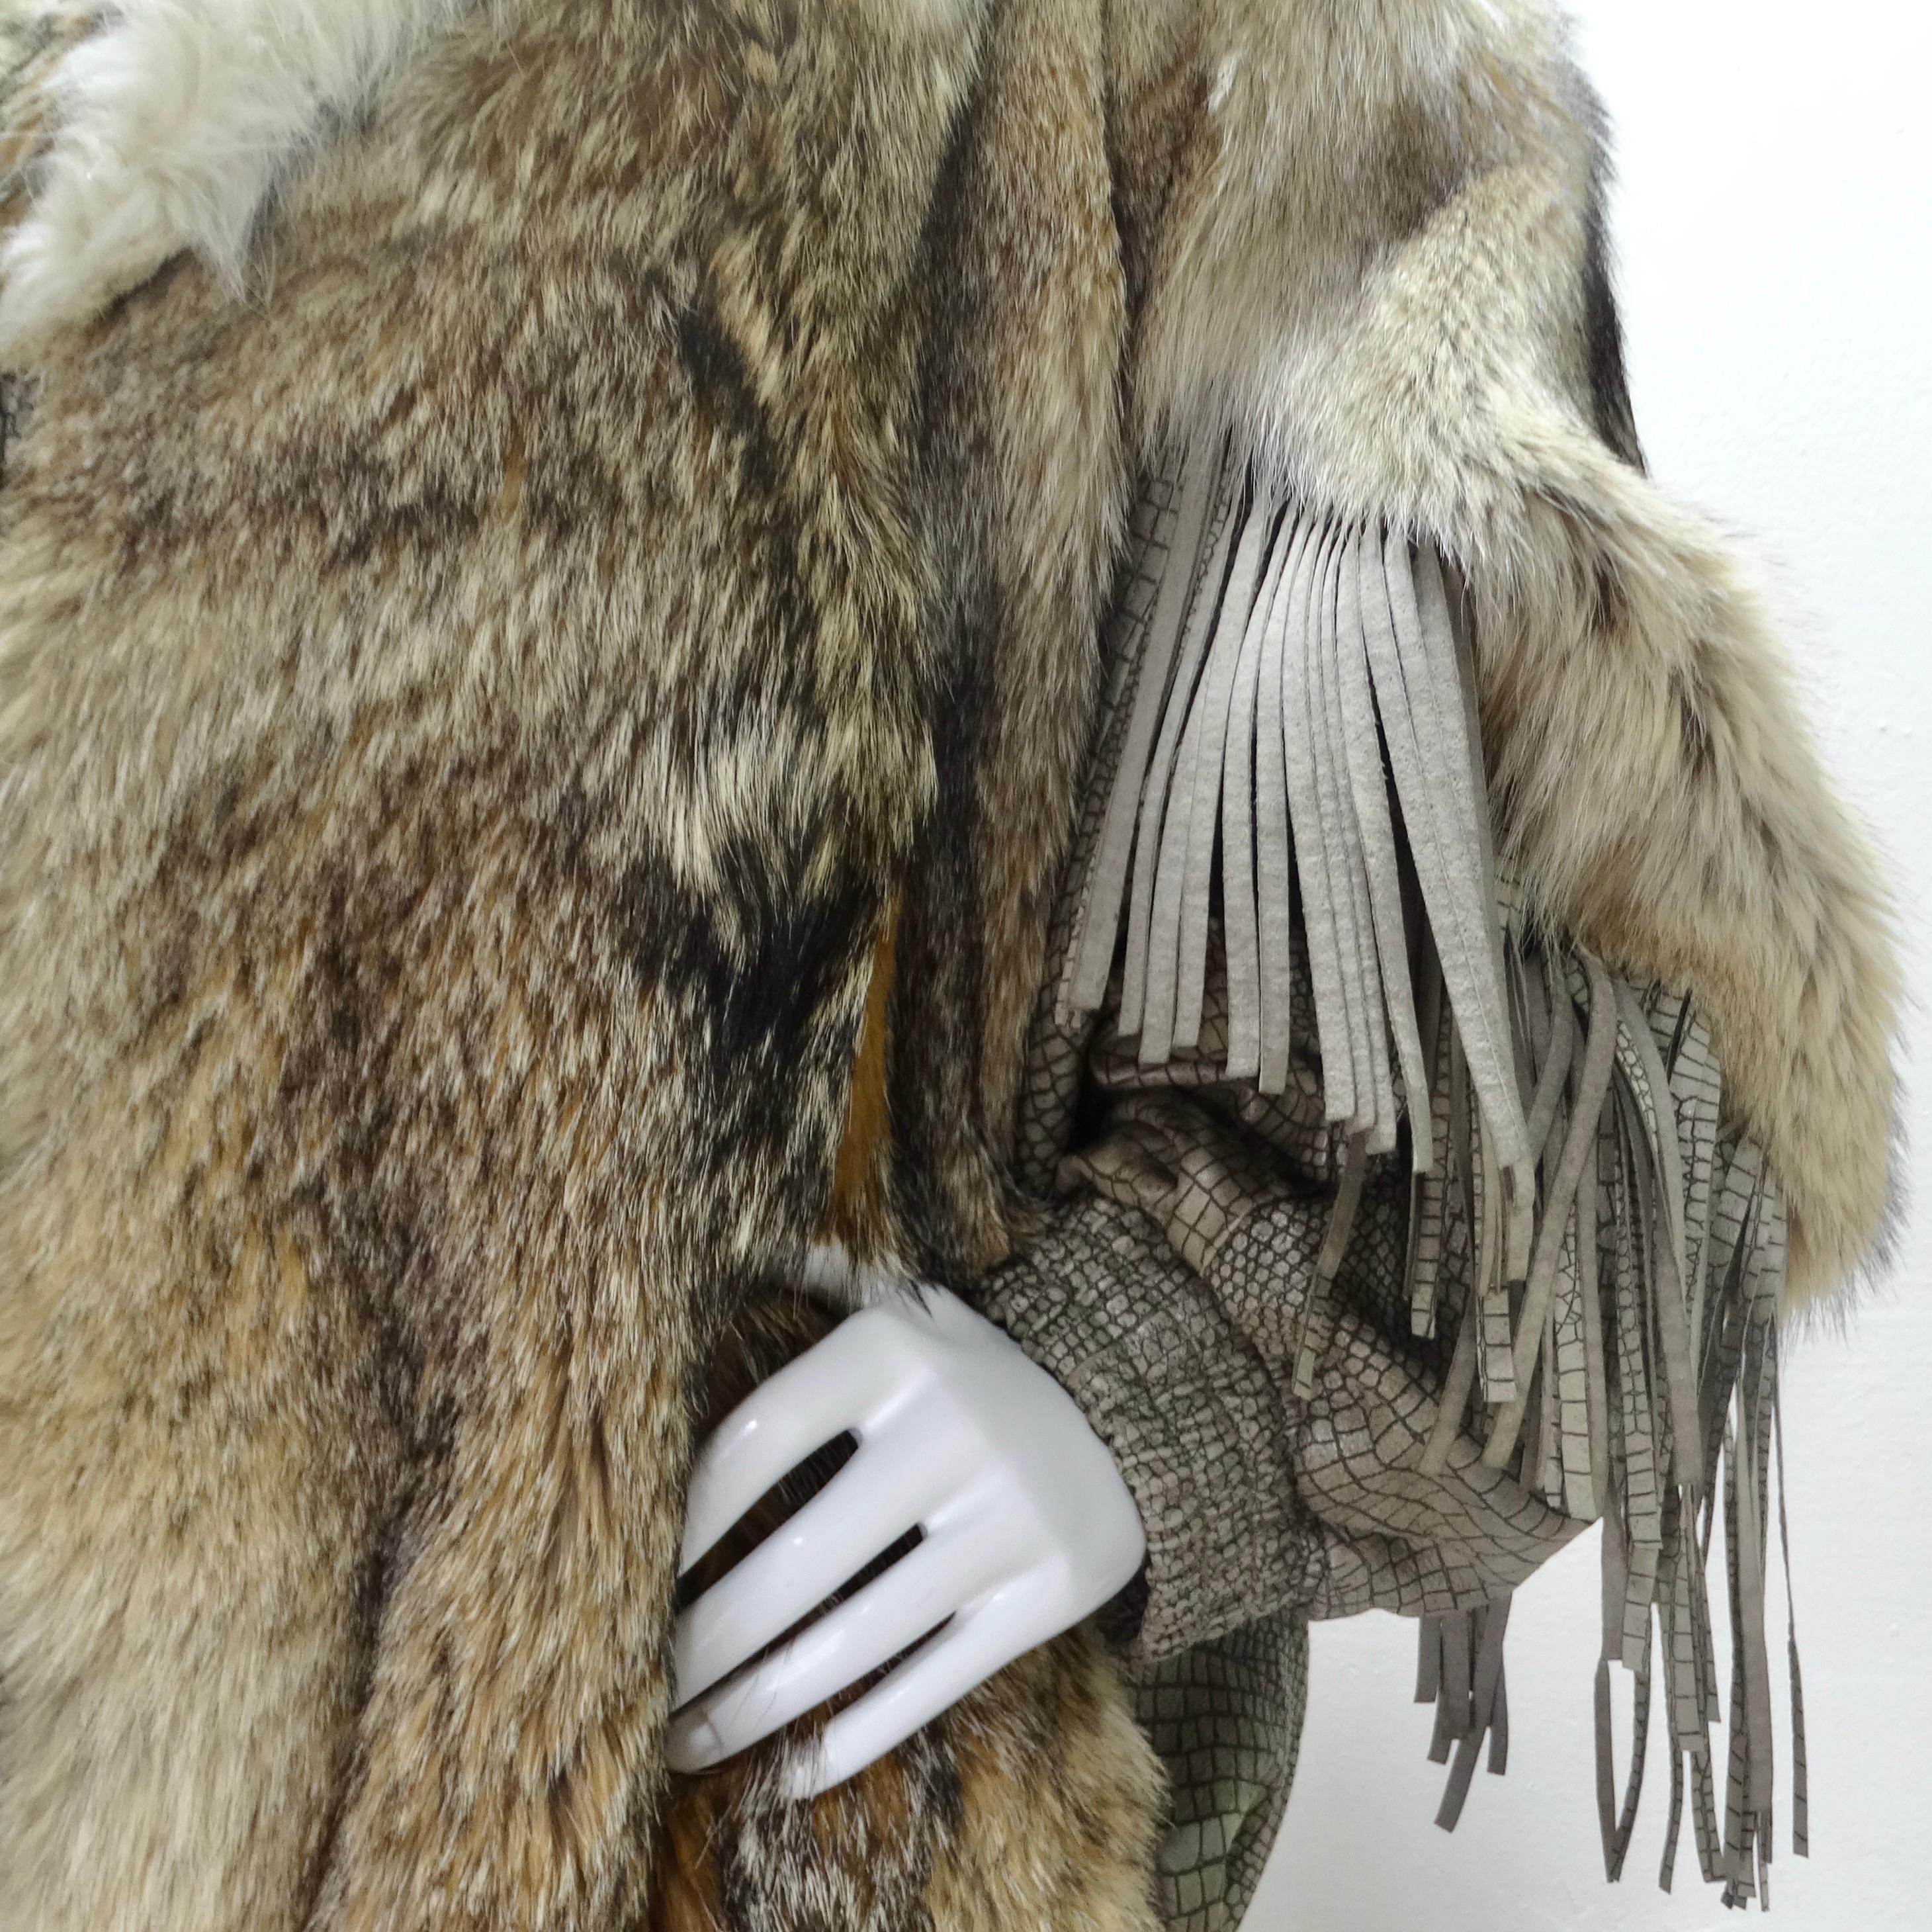 Introducing a jacket that doesn't just keep you warm but makes a bold statement in fashion - the 1980s Carlo Palazzi Coyote Fur Leather Fringe Jacket. This luxurious piece features coyote fur contrasted with light brown leather fringe, creating a